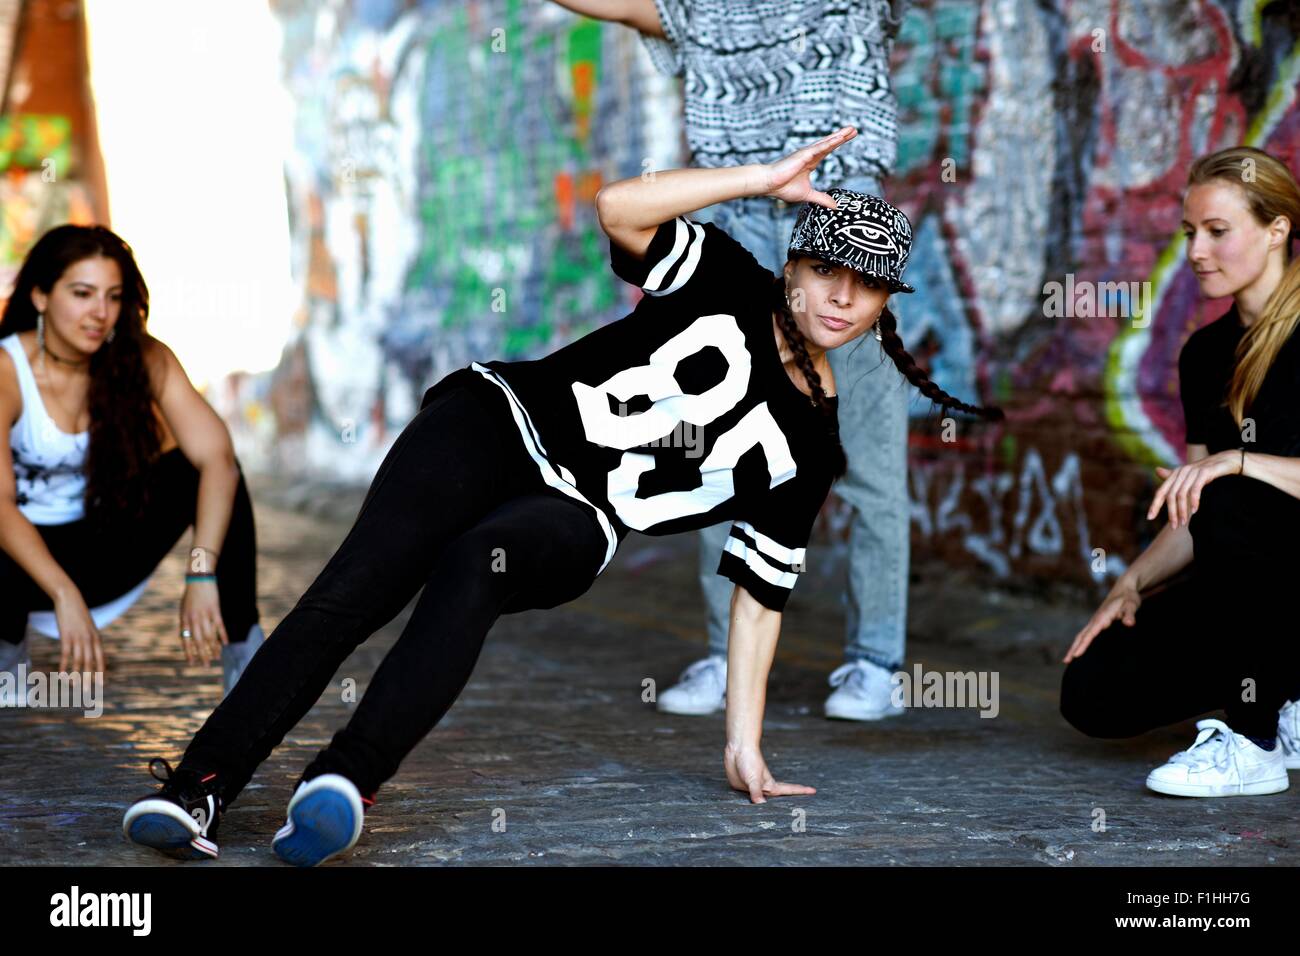 Young woman breakdancing Stock Photo